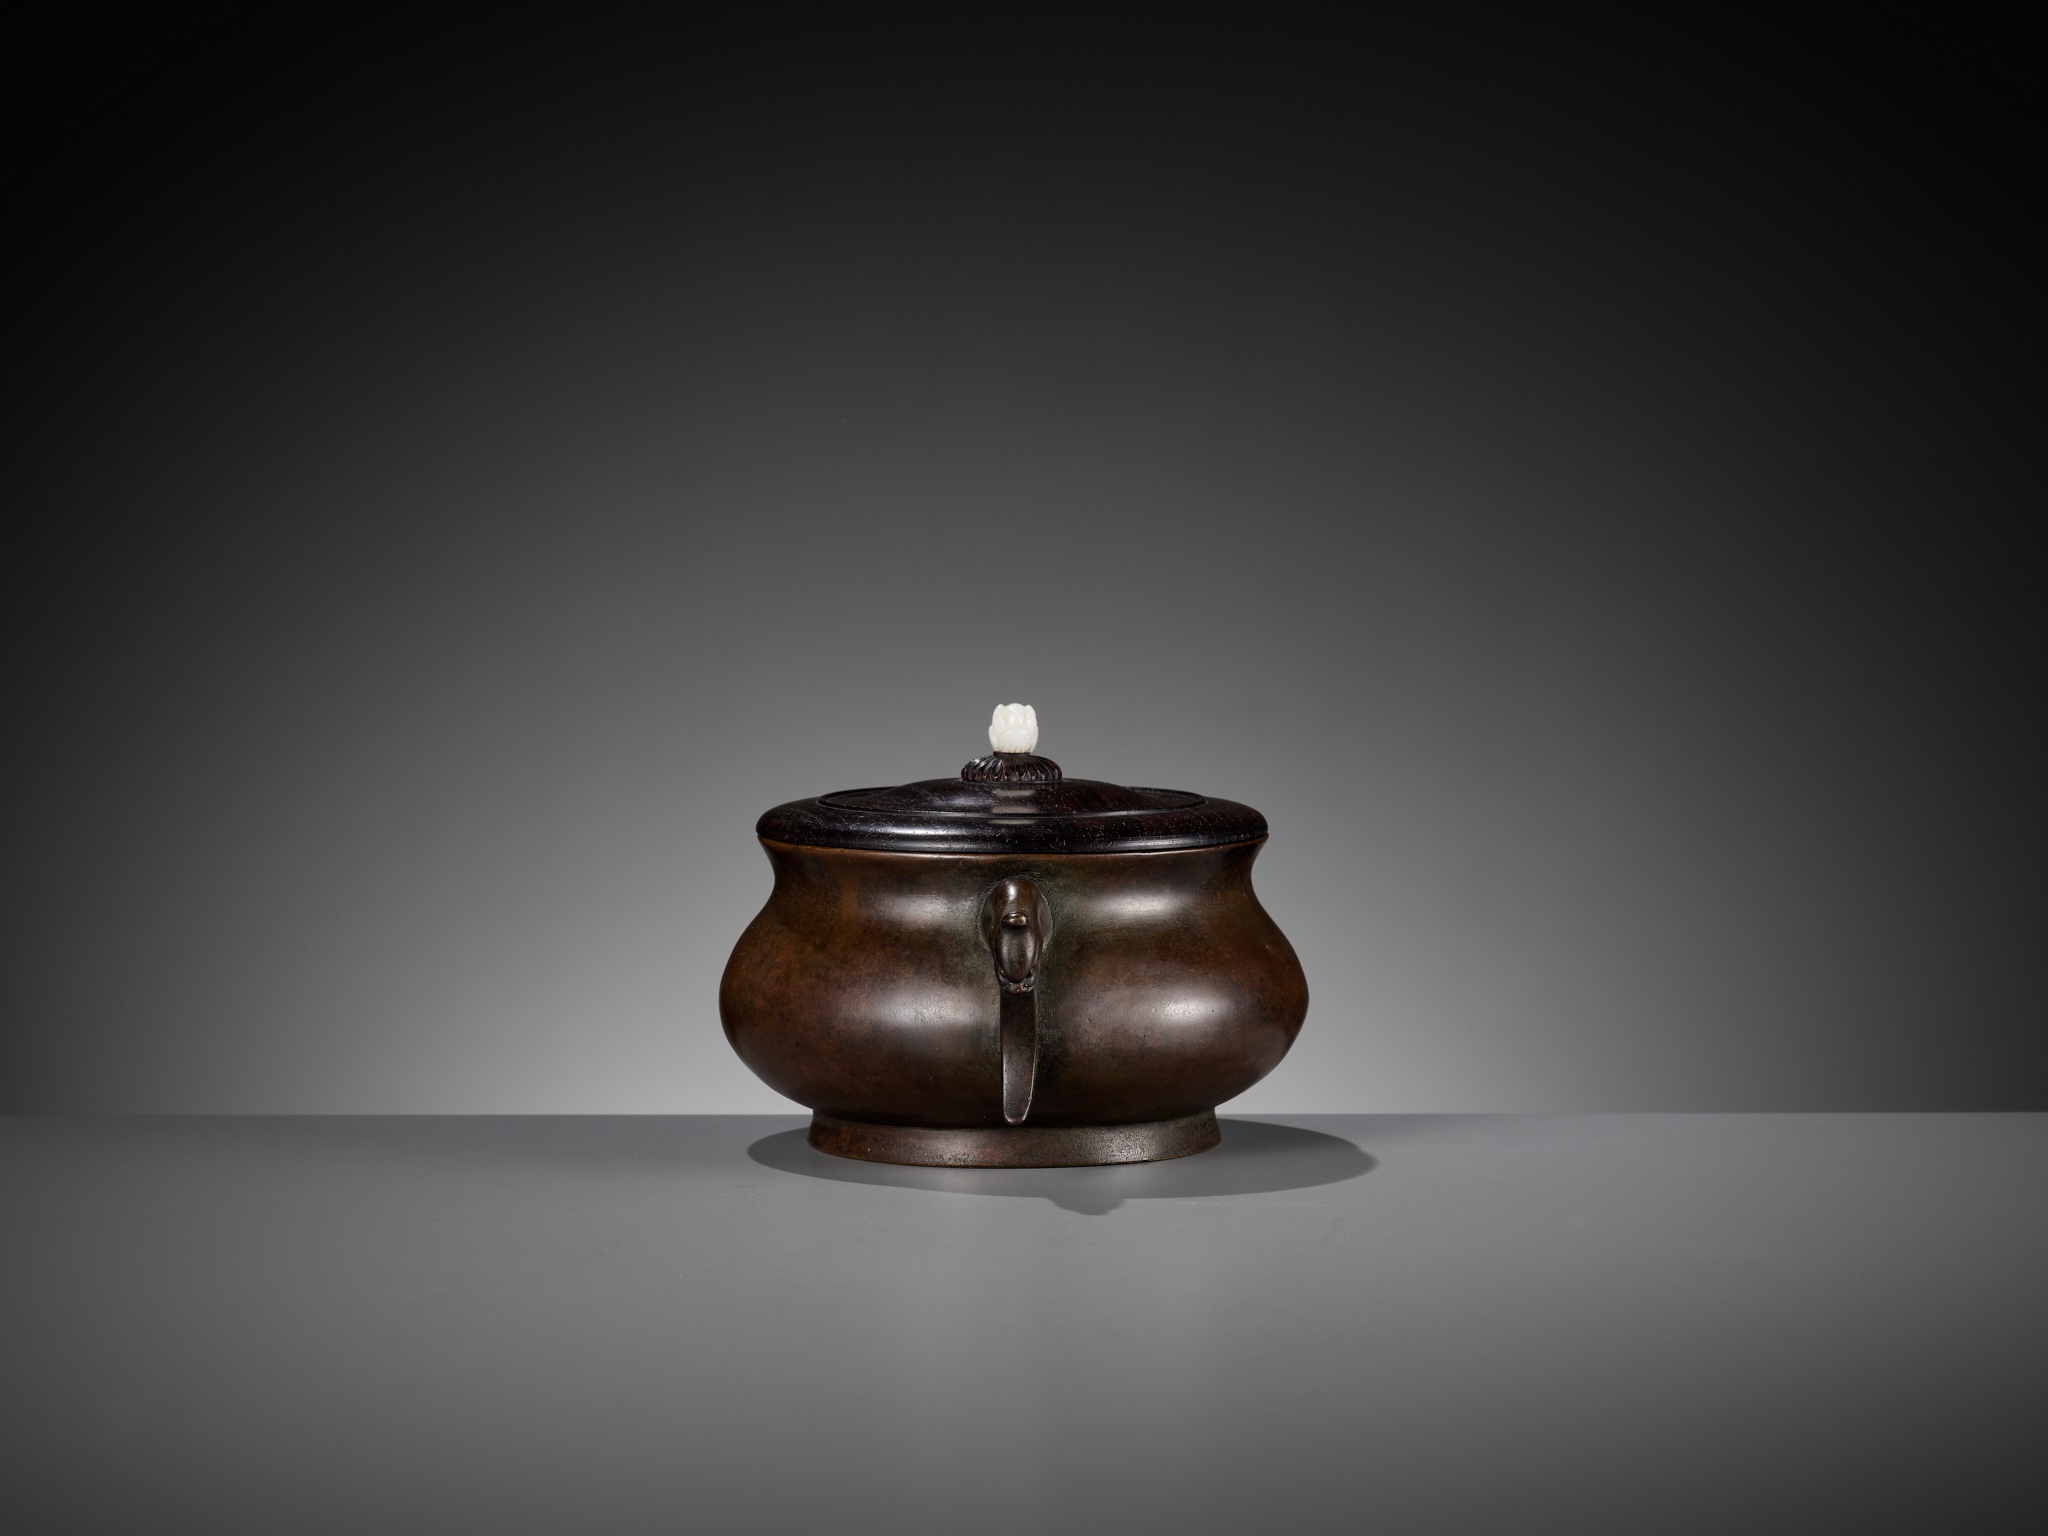 A BRONZE CENSER WITH A ZITAN WOOD COVER AND A WHITE JADE FINIAL, 17TH-18TH CENTURY - Image 11 of 16